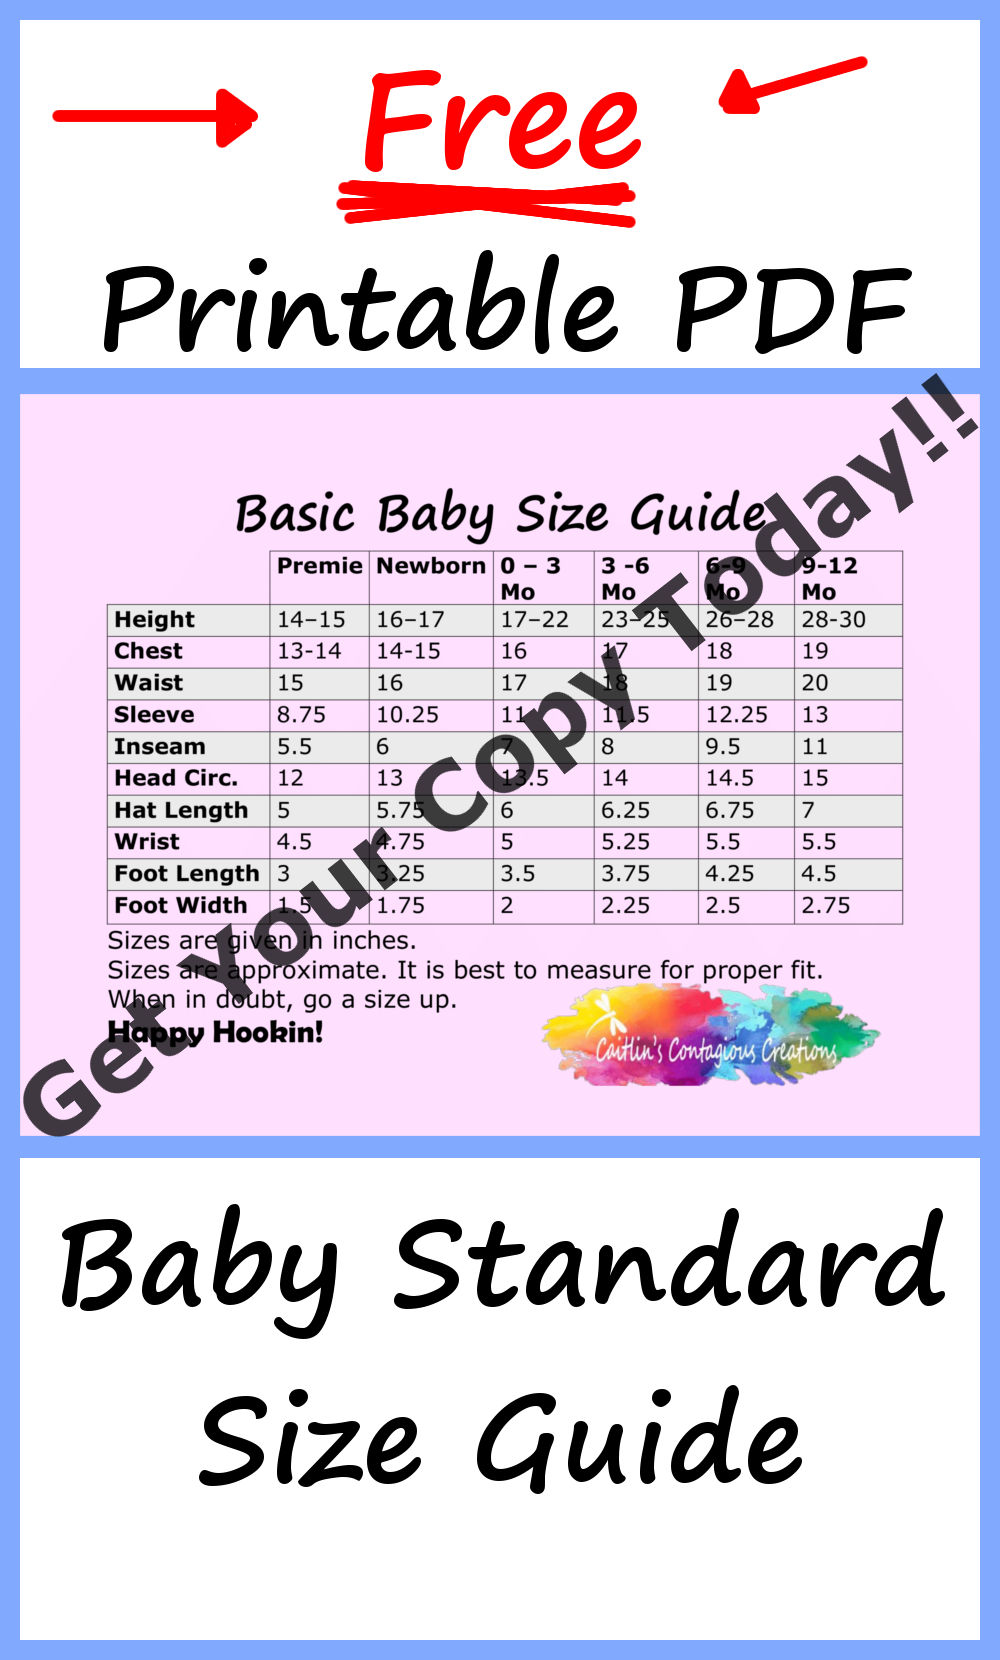 Standard Size Baby Quick Guide Opt-In Graphic